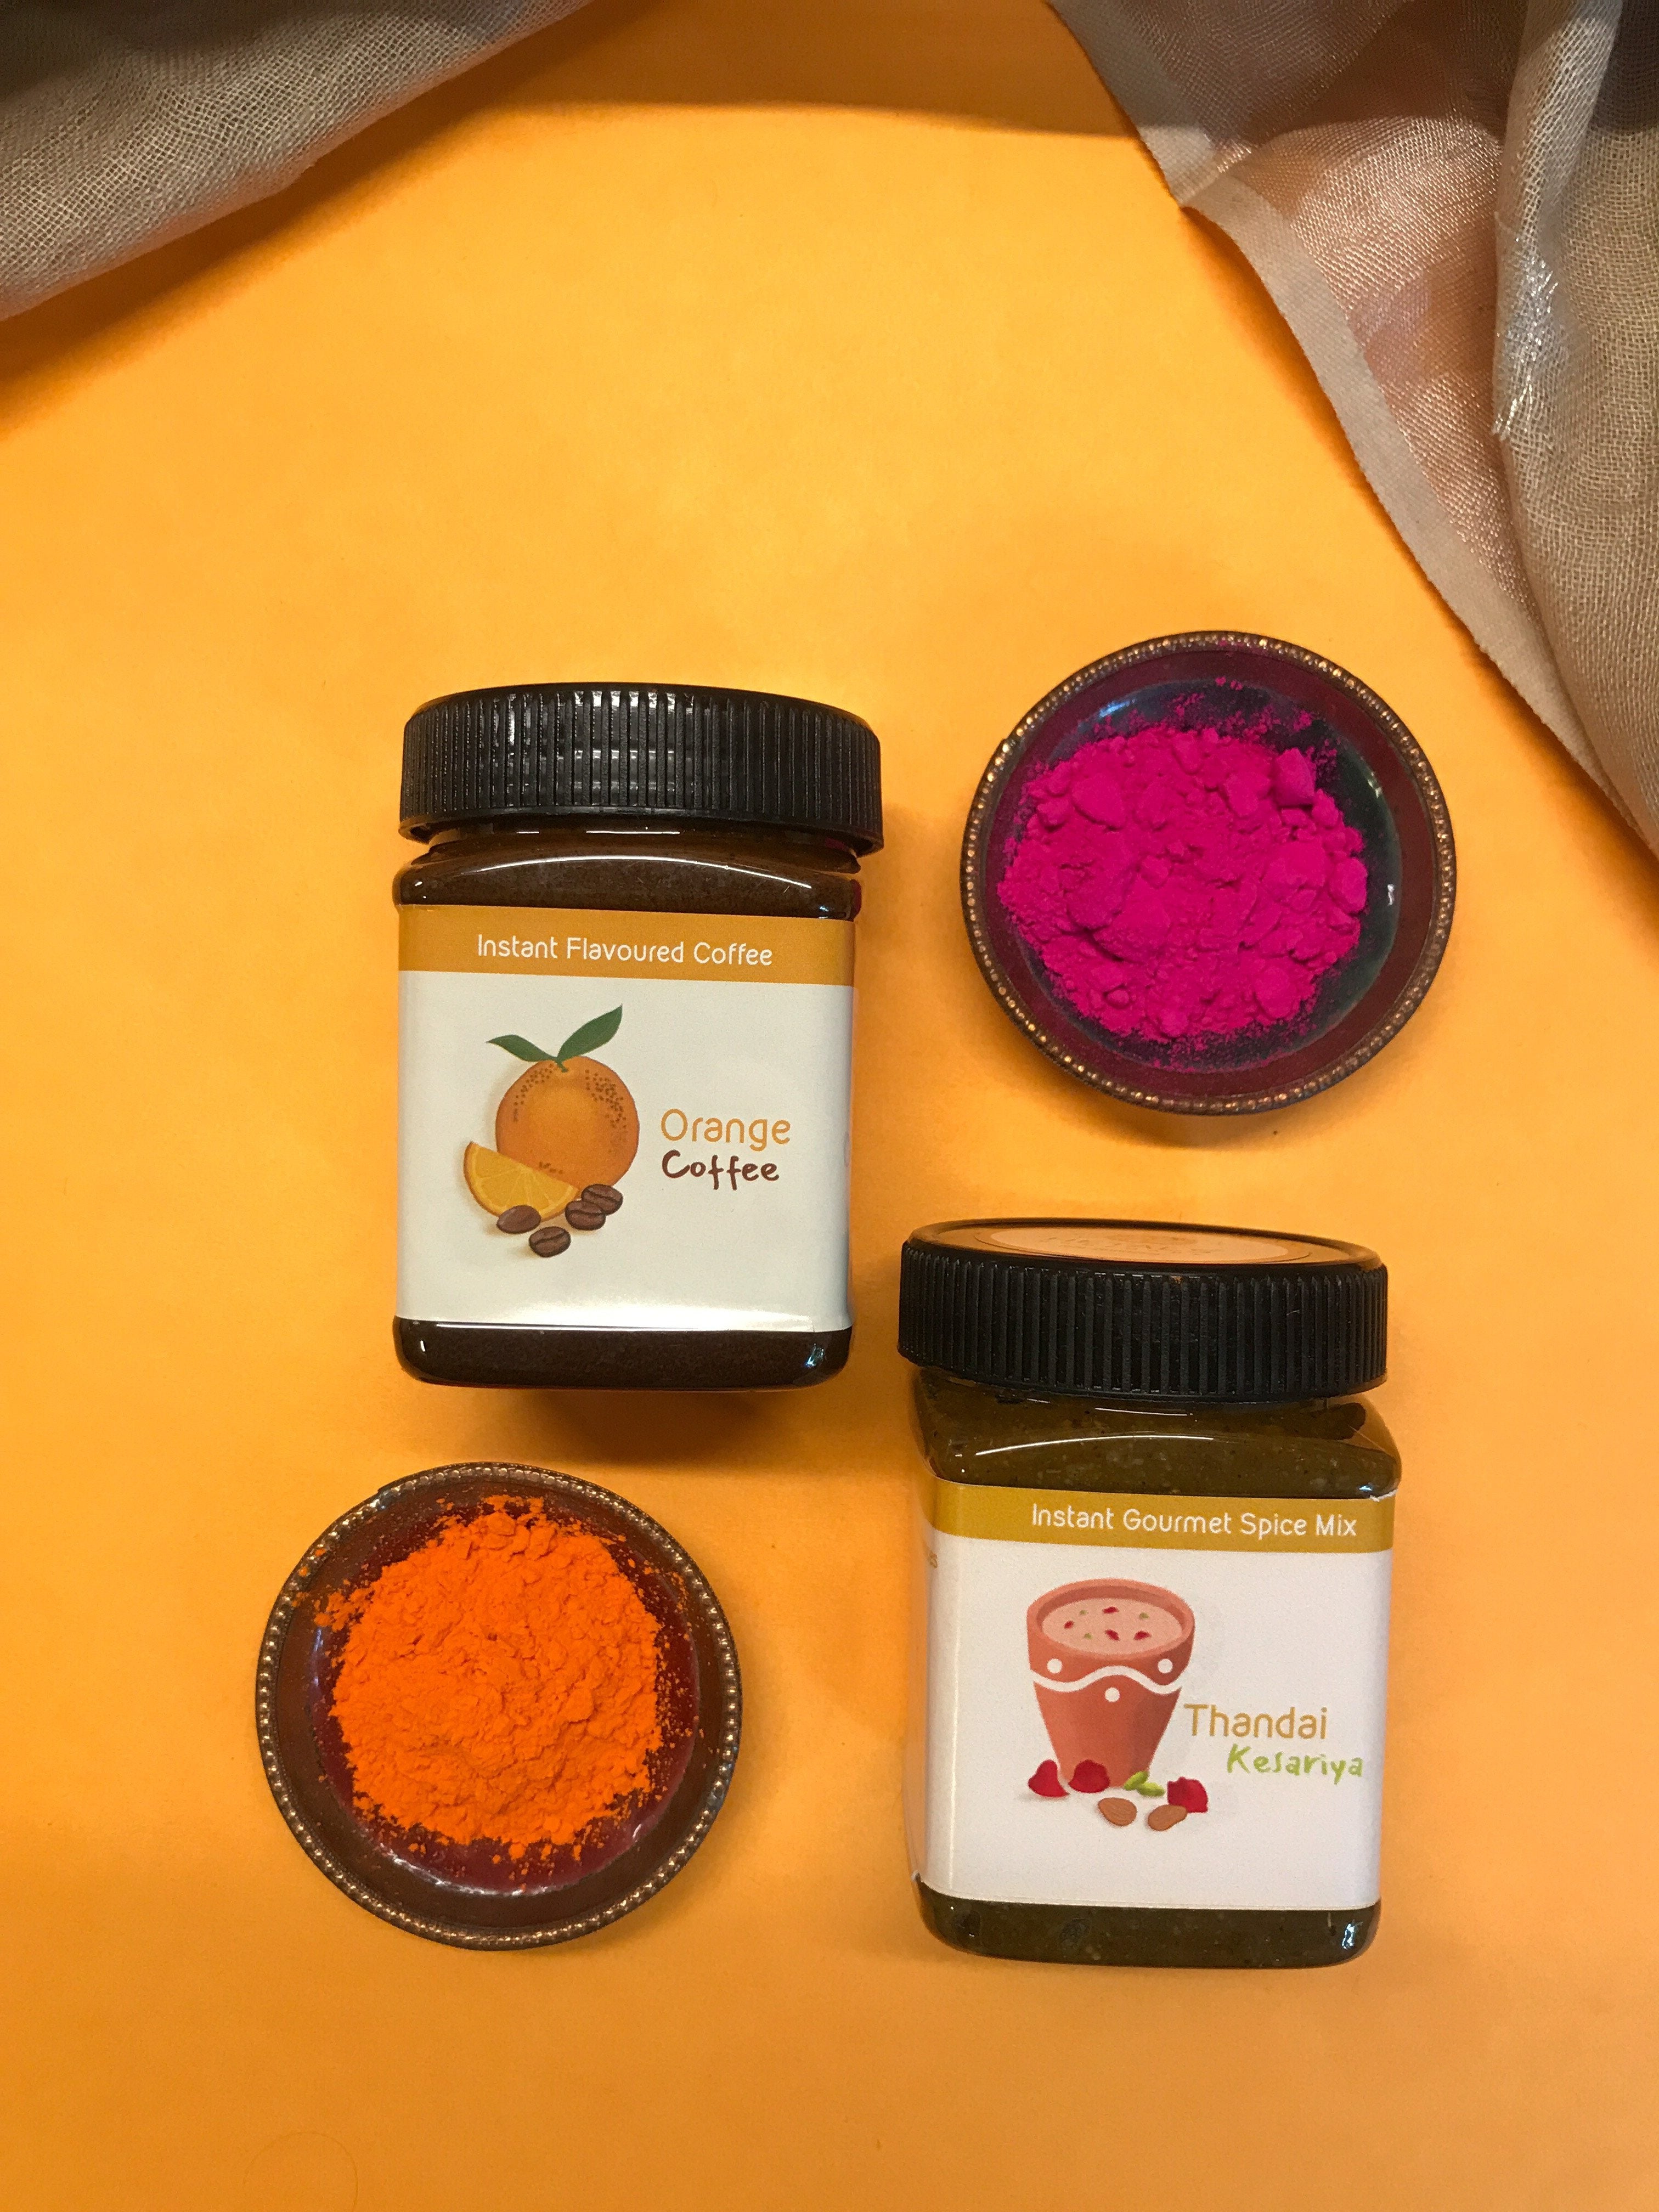 An image of Hetal's Homemade Holi Hamper. The hamper consists of two of our products. Thandai and Orange flavoured instant coffee. The image also shows organic holi colours in a bowl for decorative purposes.